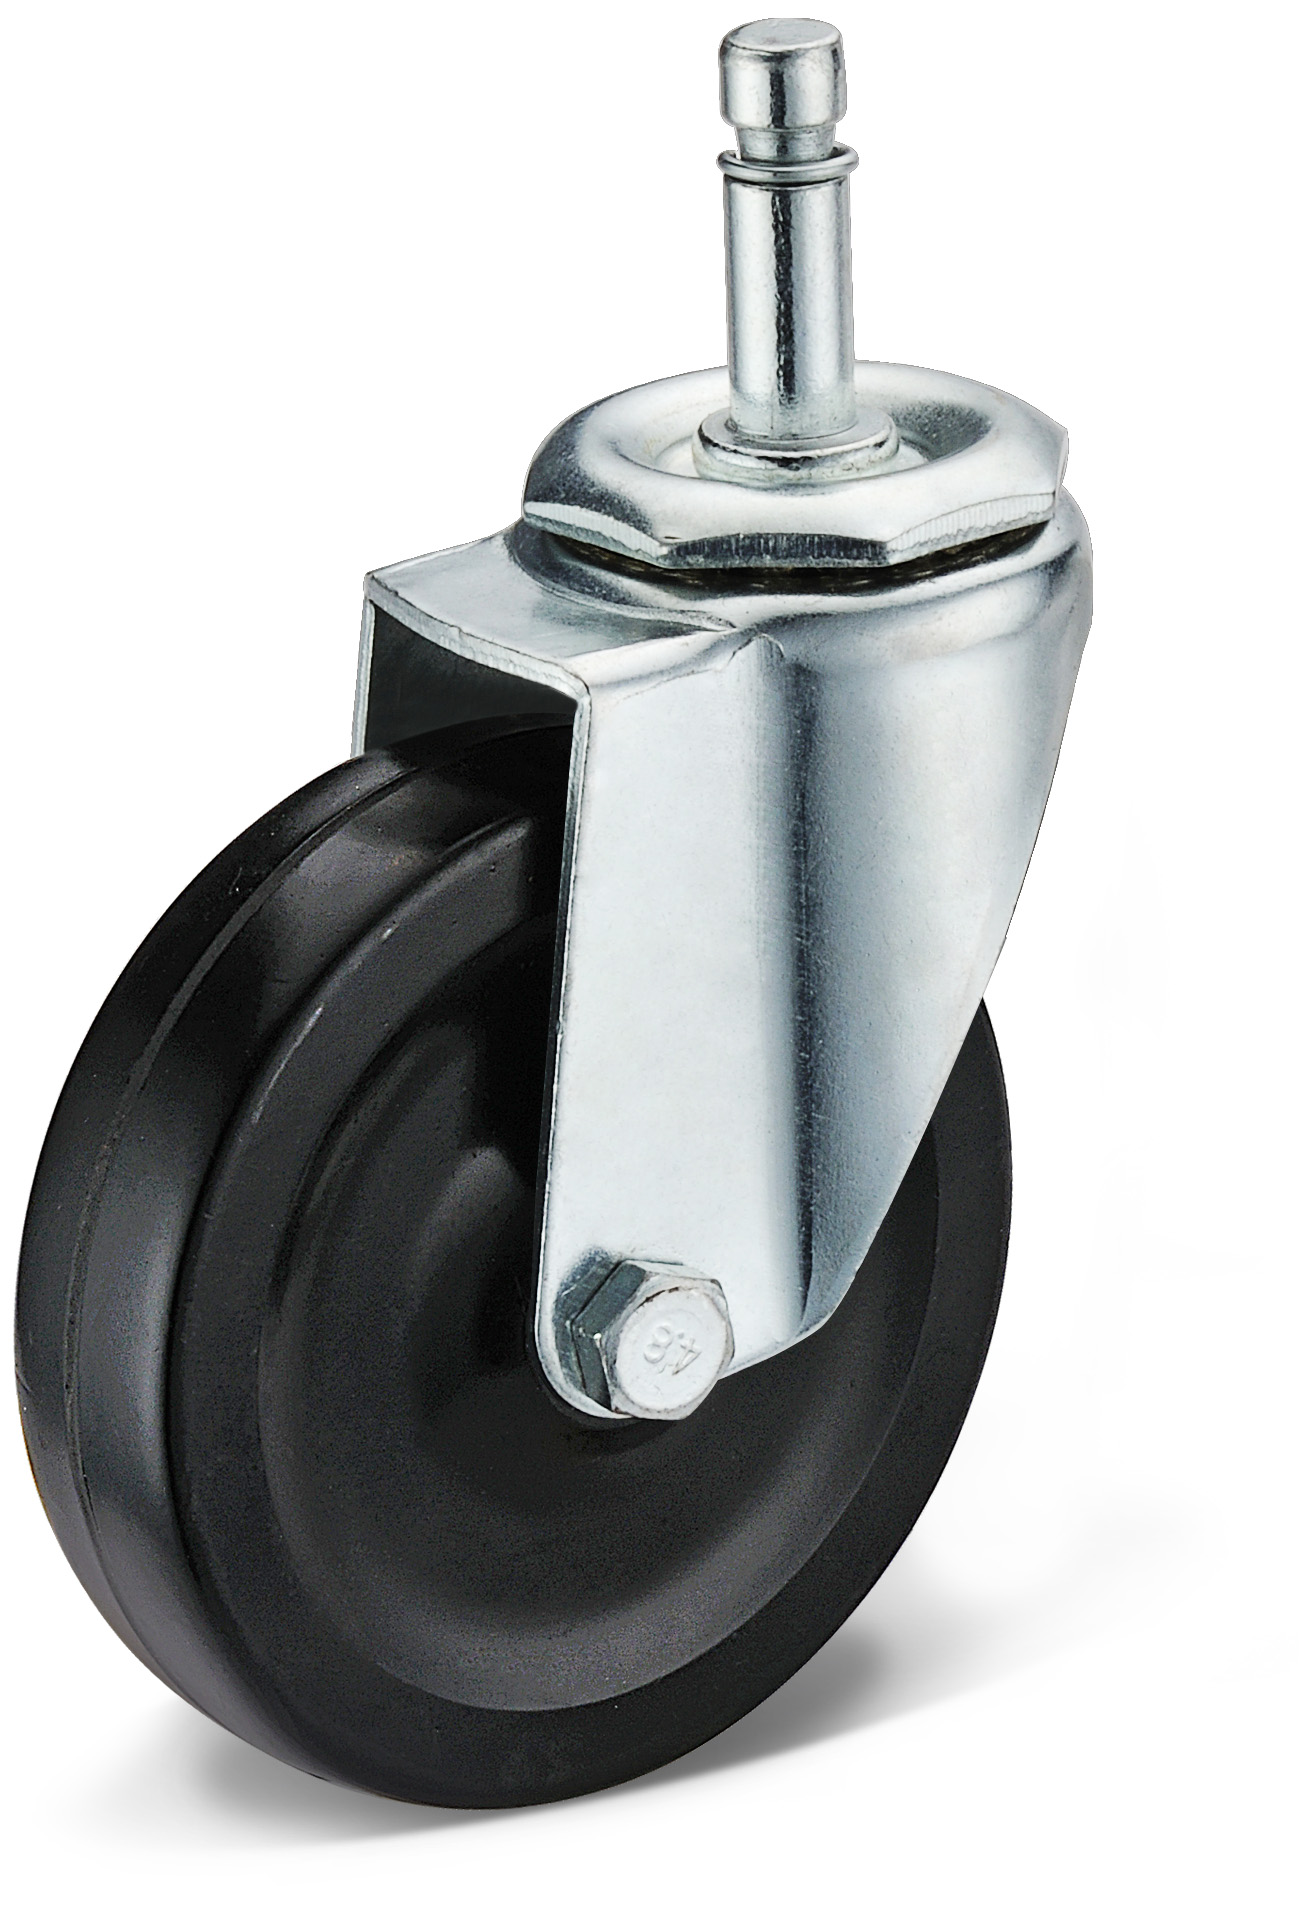 Black rubber trolley casters